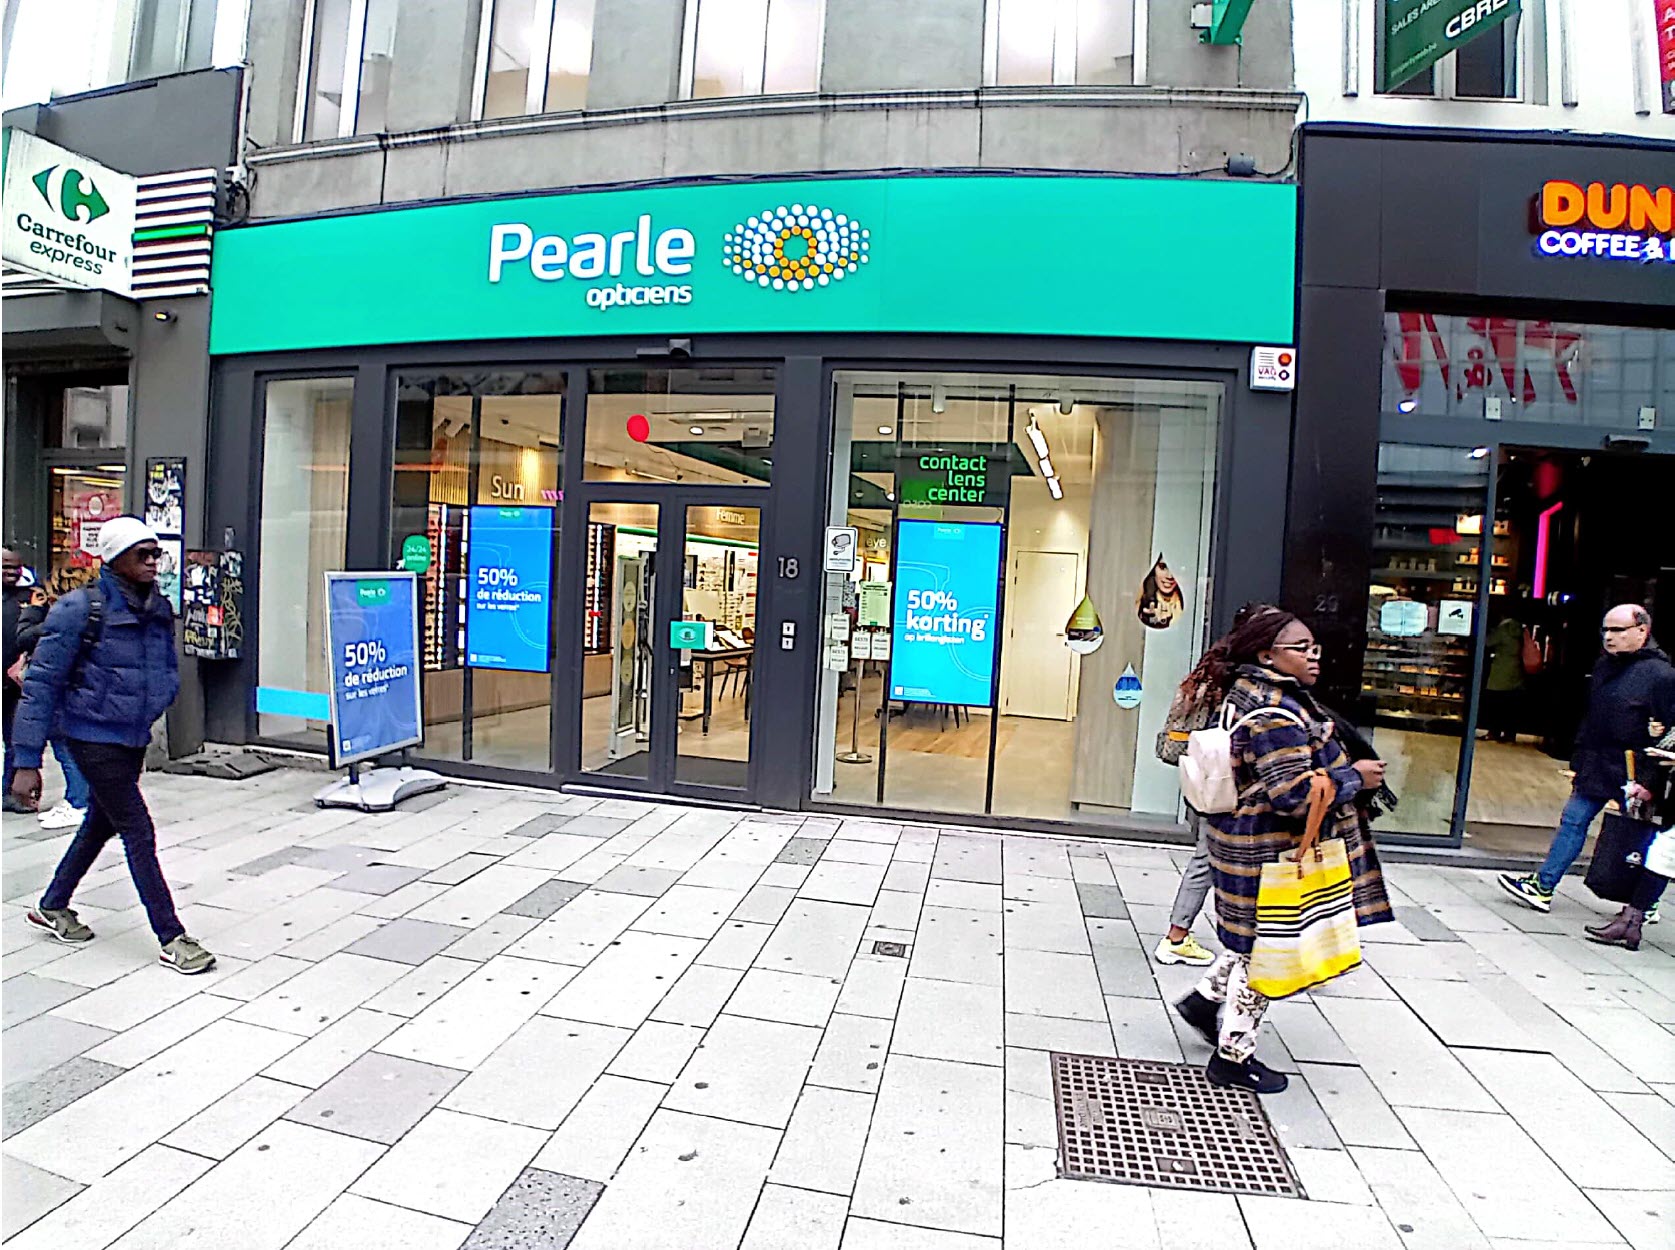 Pearle Opticiens Ixelles - Brussel (+contact lens center)